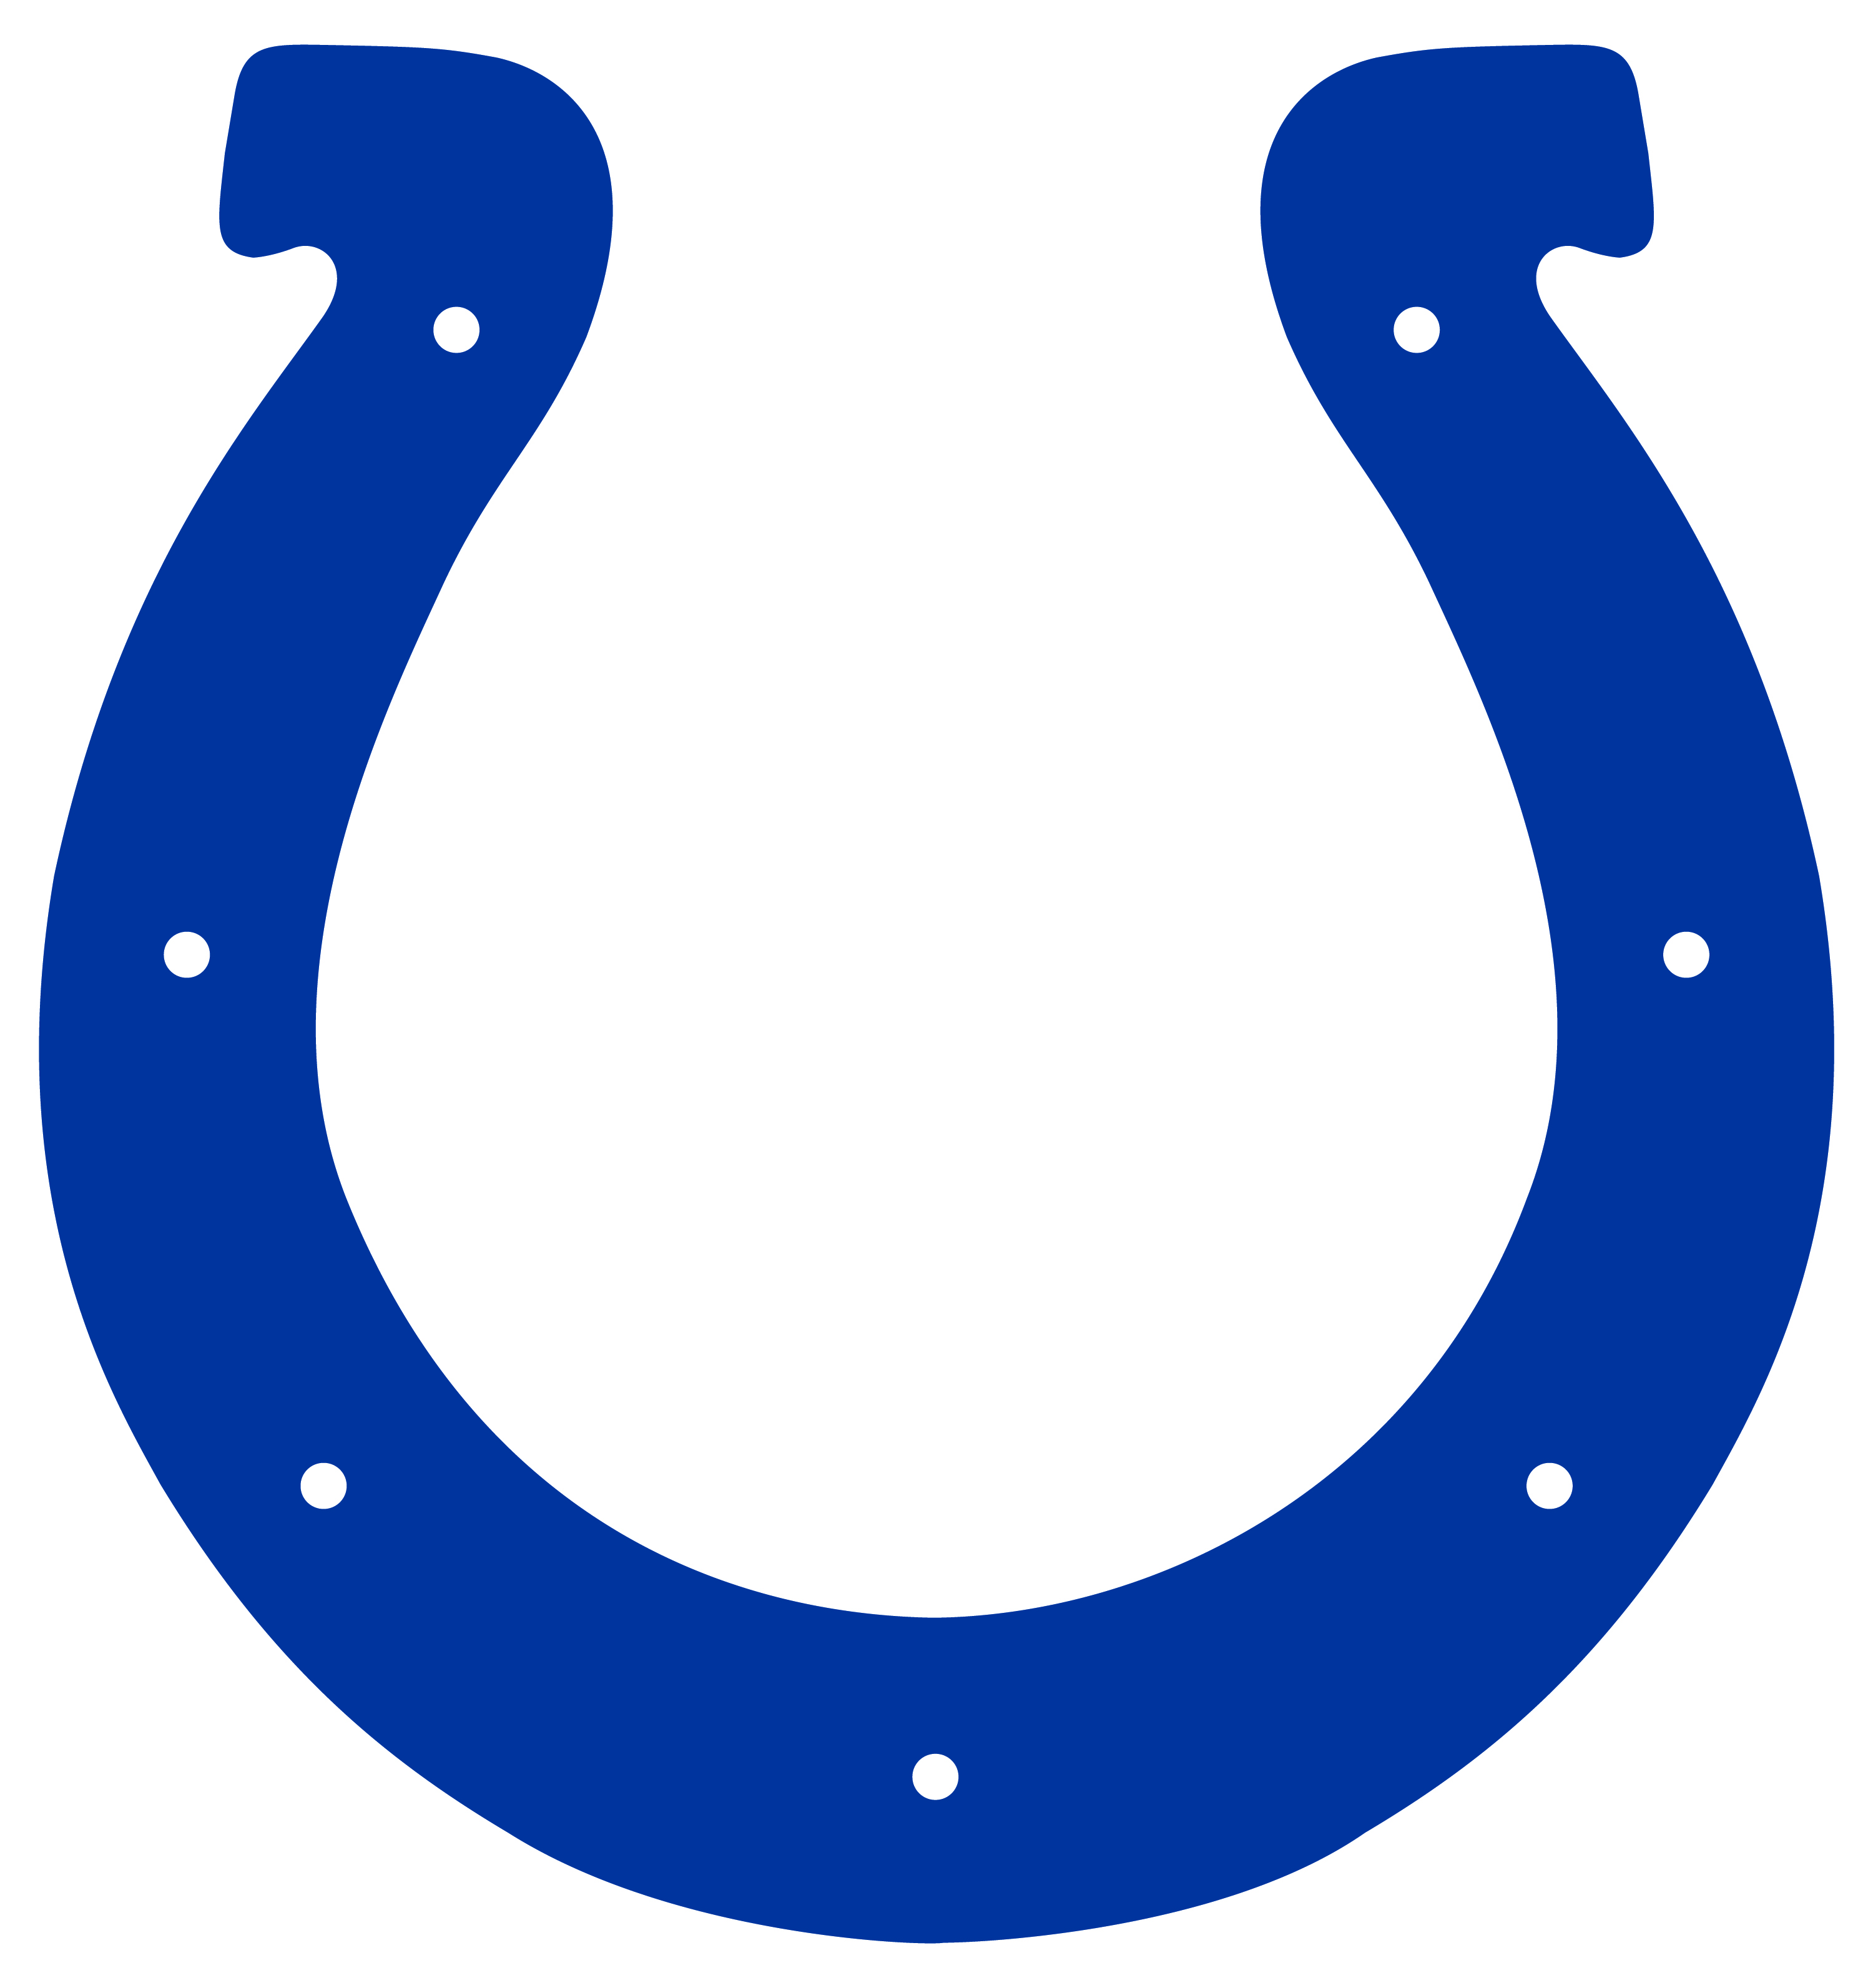 Indianapolis Colts logo (opens in new window)